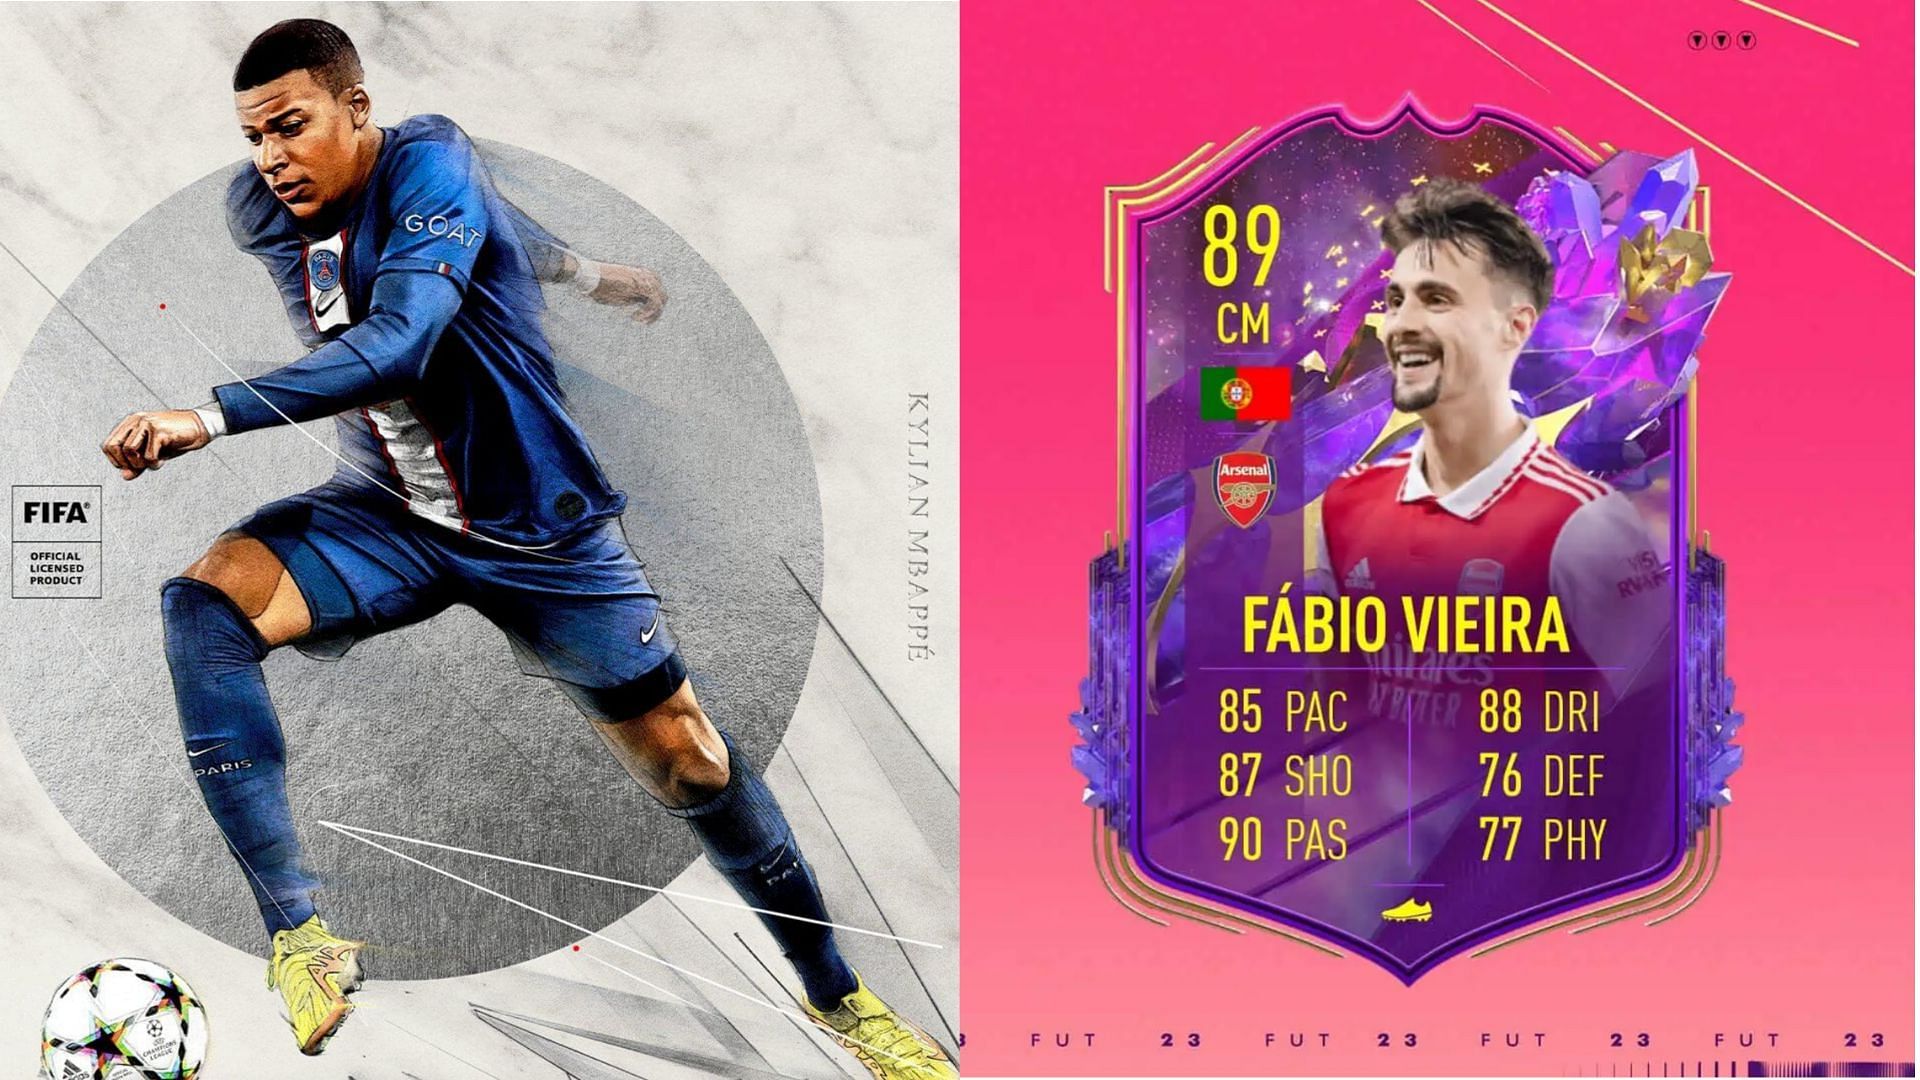 FIFA 23 Fabio Vieira Future Stars SBC - How to complete, estimated costs, and more